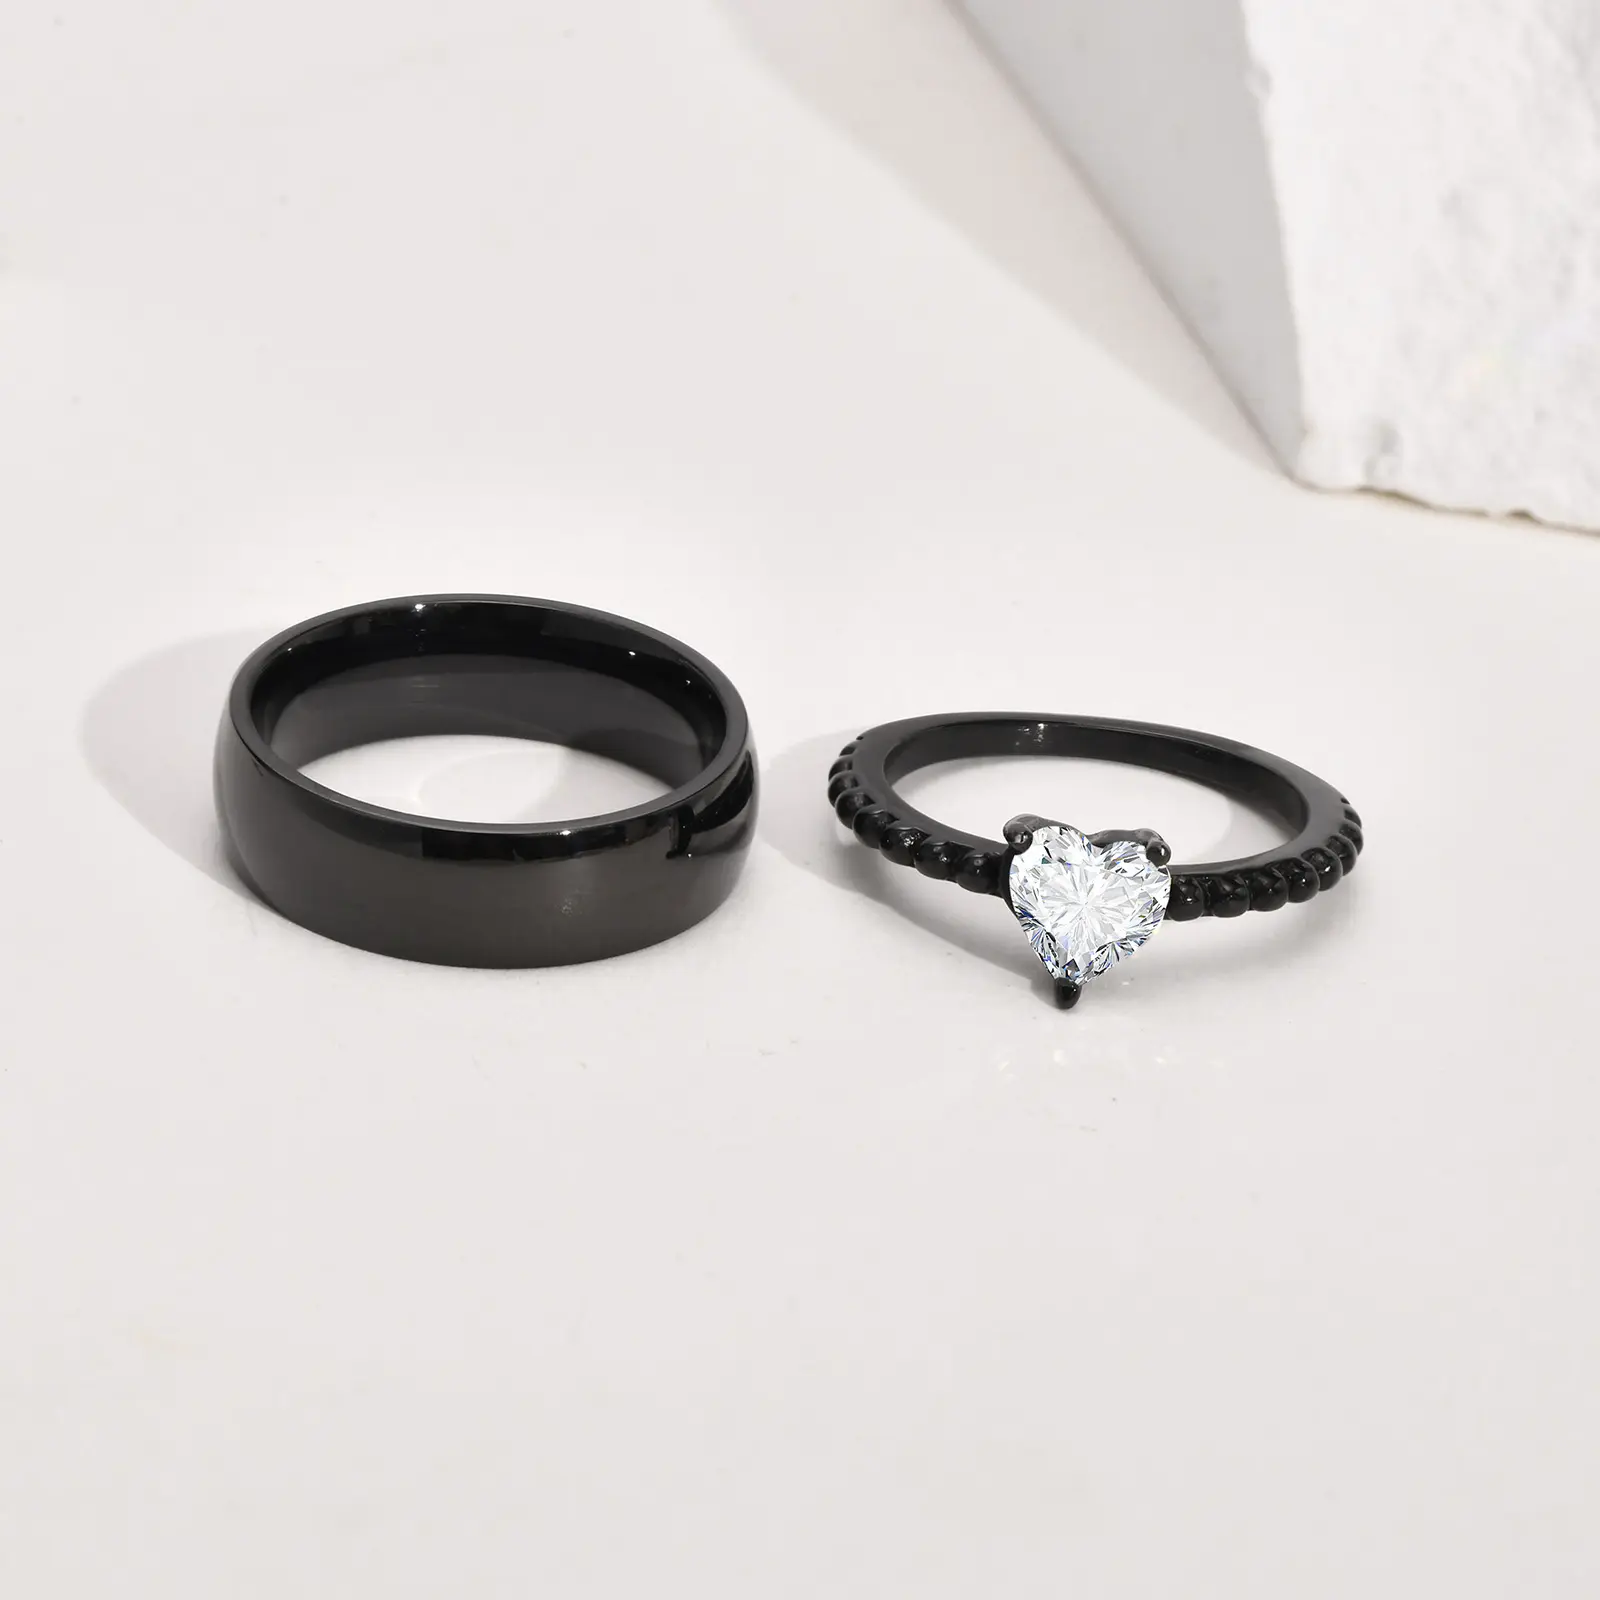 Fashion Stainless Steel Black Couple Ring Jewelry For Wedding Engagement Jewelry Diamond Zircon Ring Couple Rings